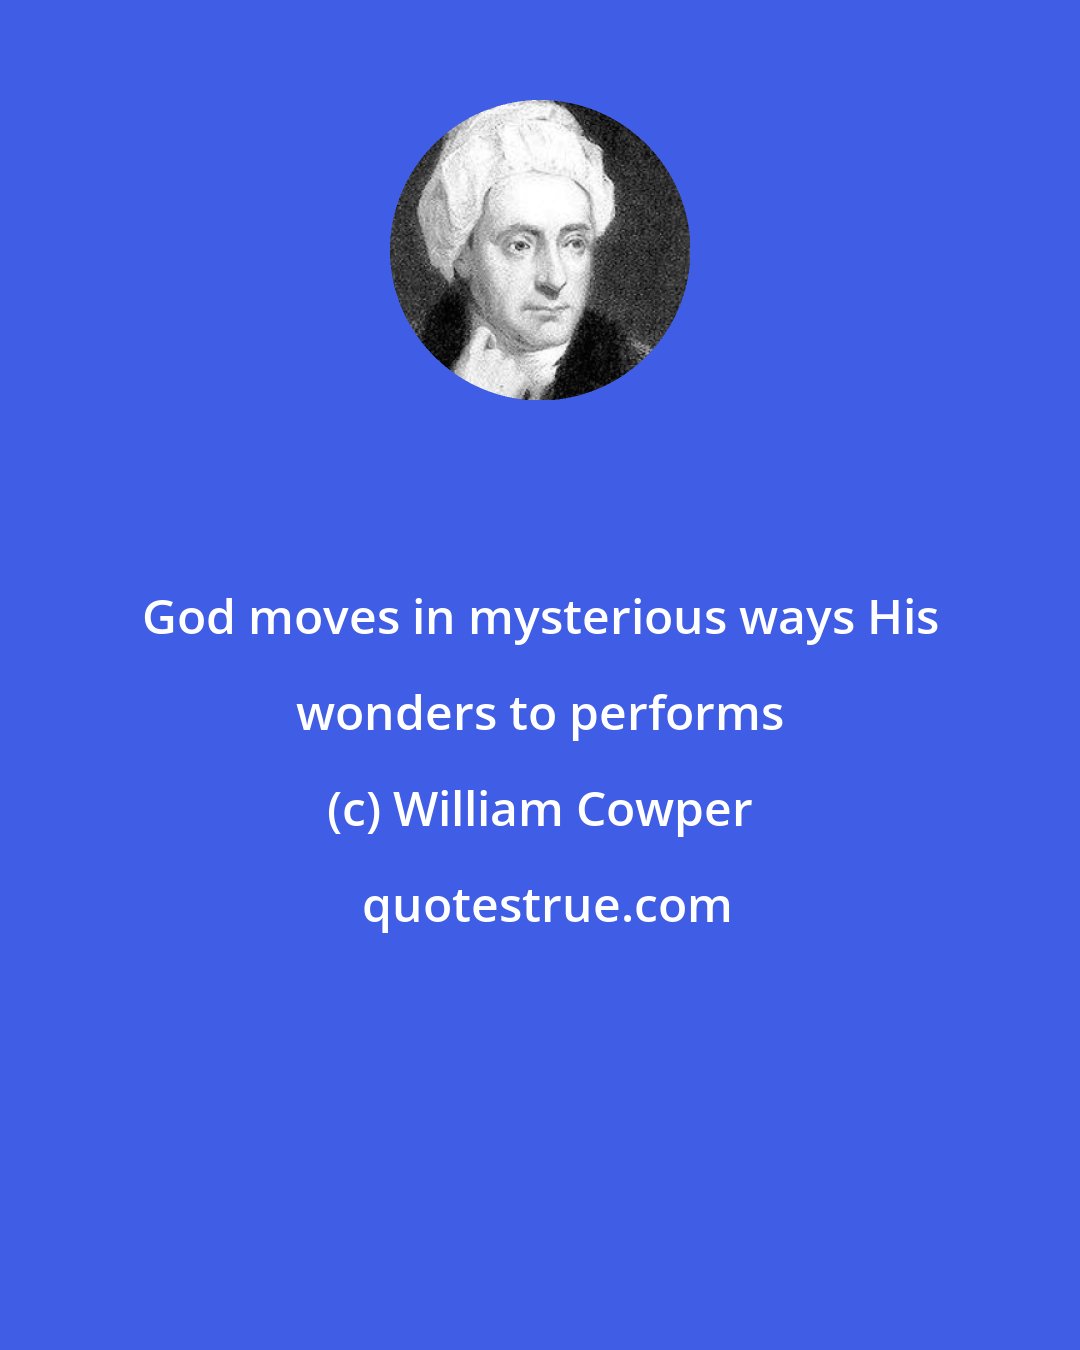 William Cowper: God moves in mysterious ways His wonders to performs